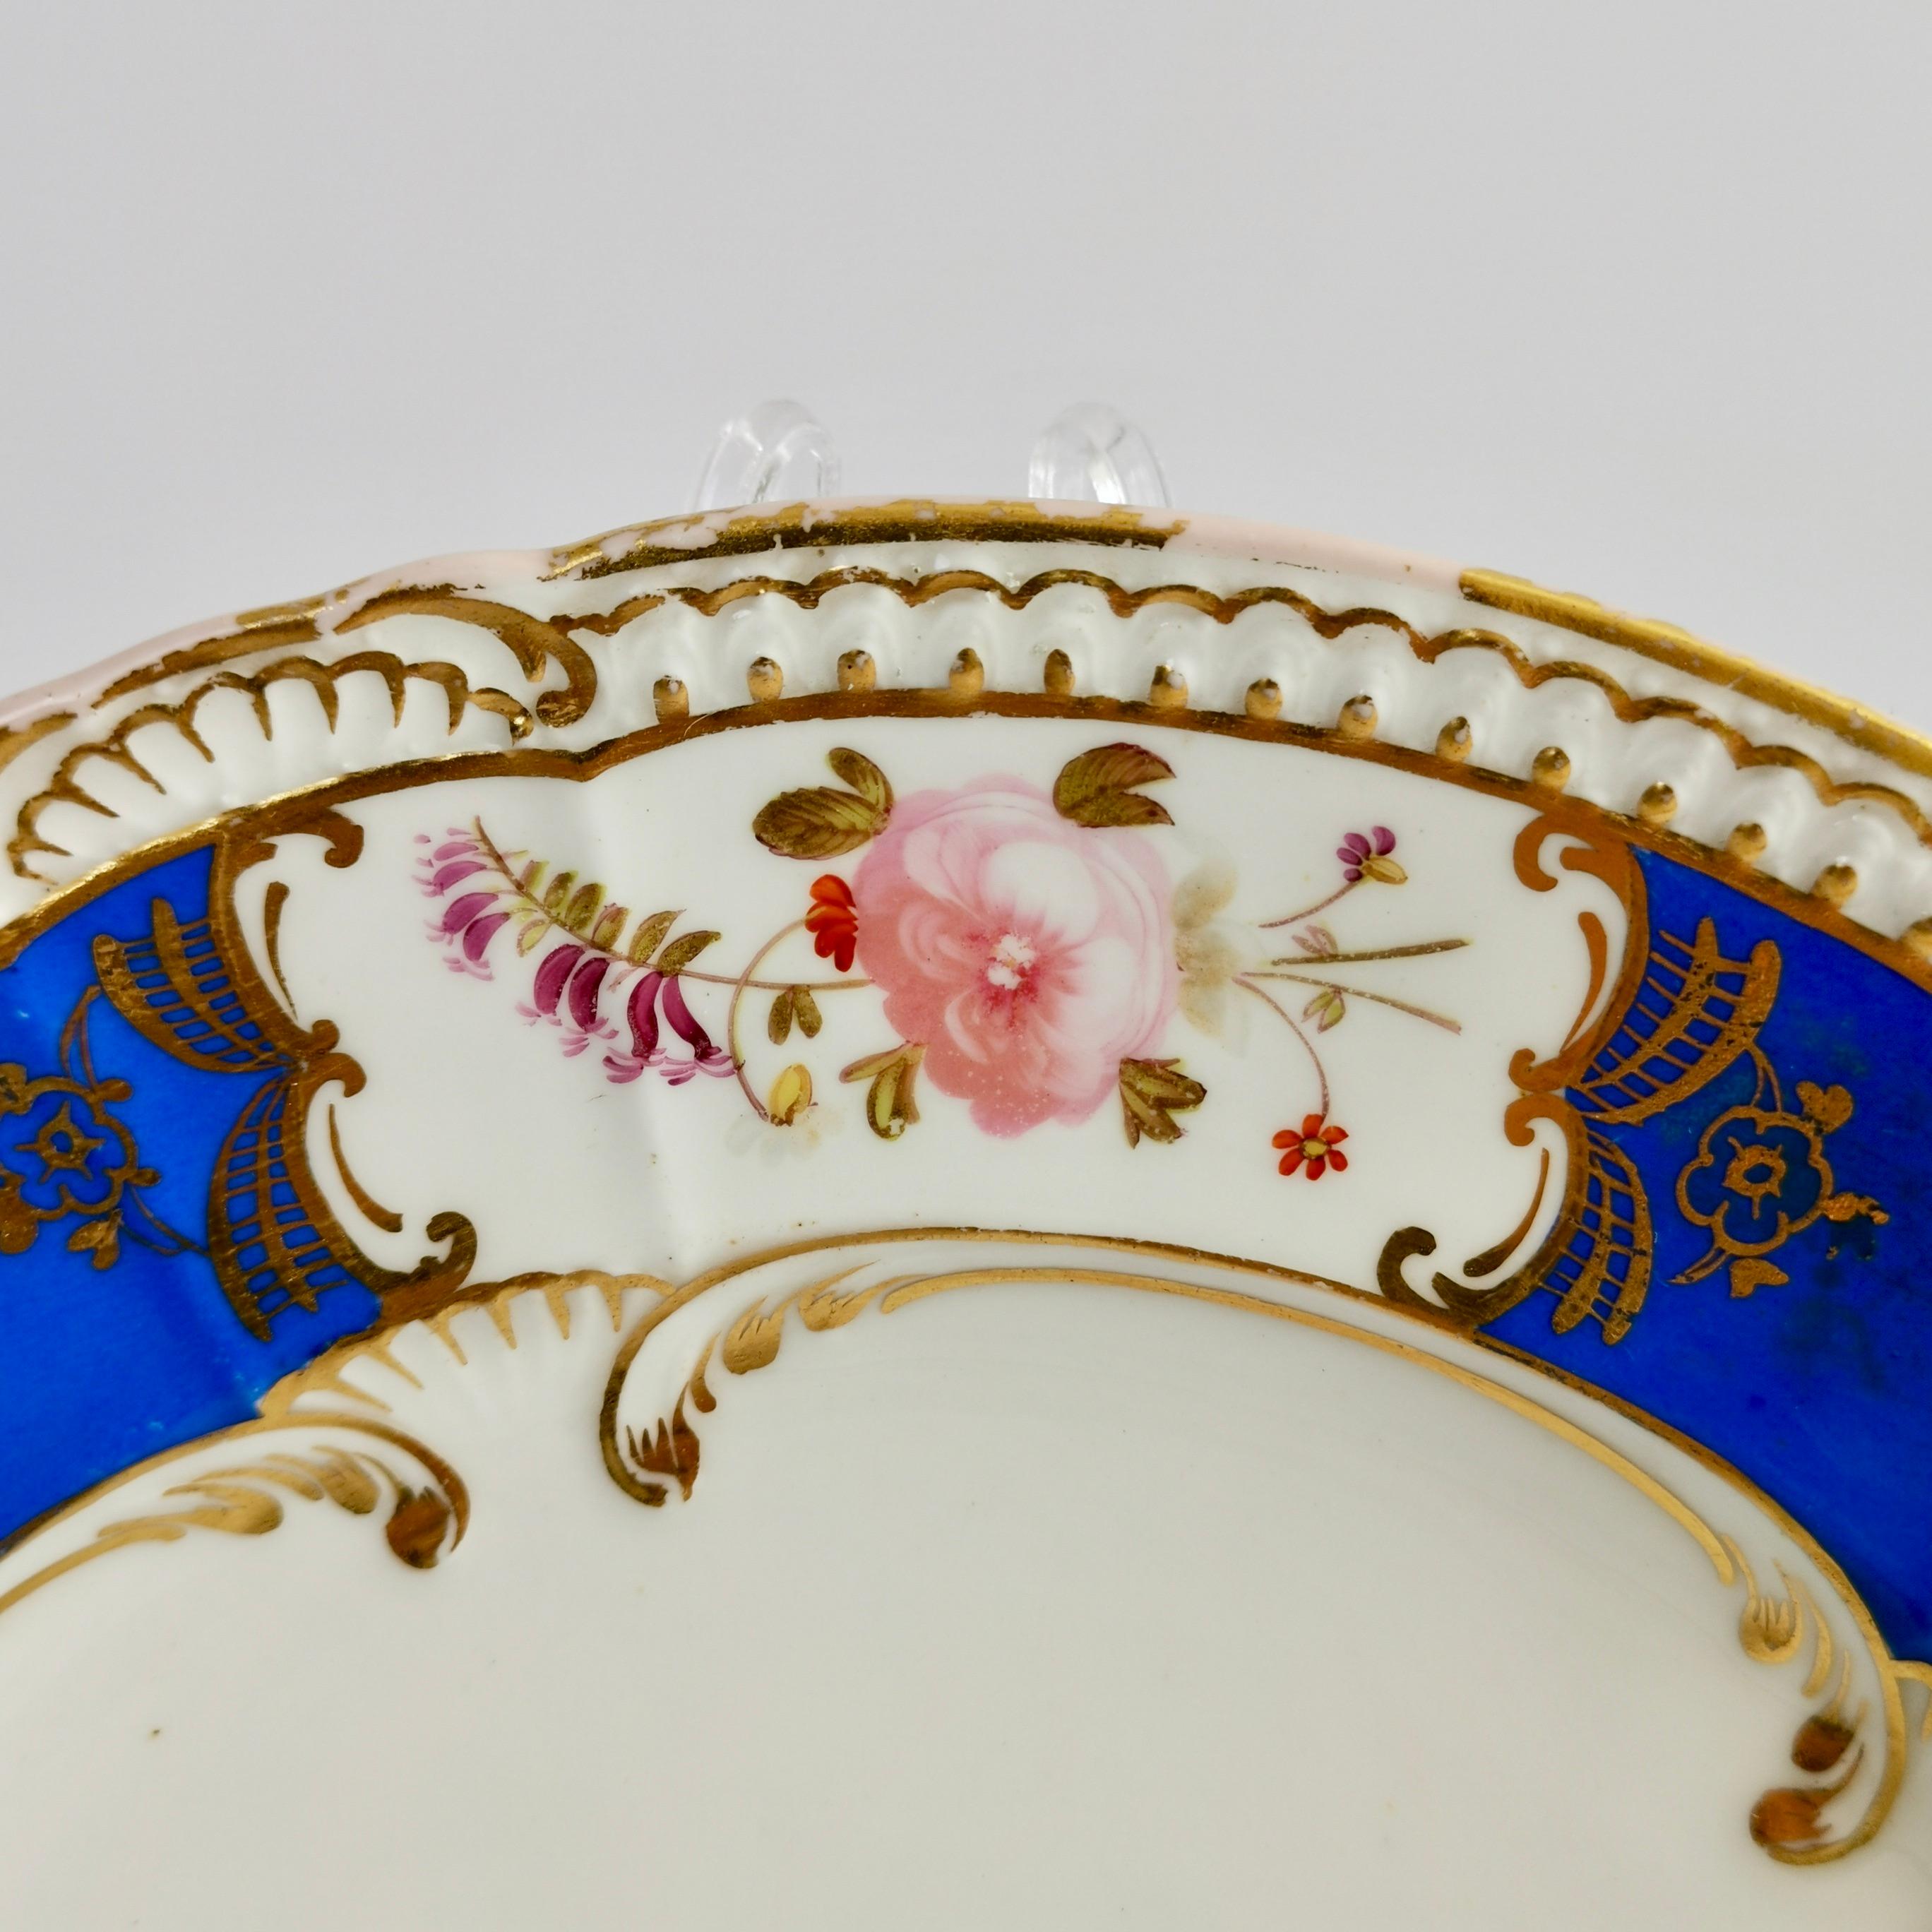 Hand-Painted Coalport Porcelain Plate, Blue with Hand Painted Flowers, Regency 1827